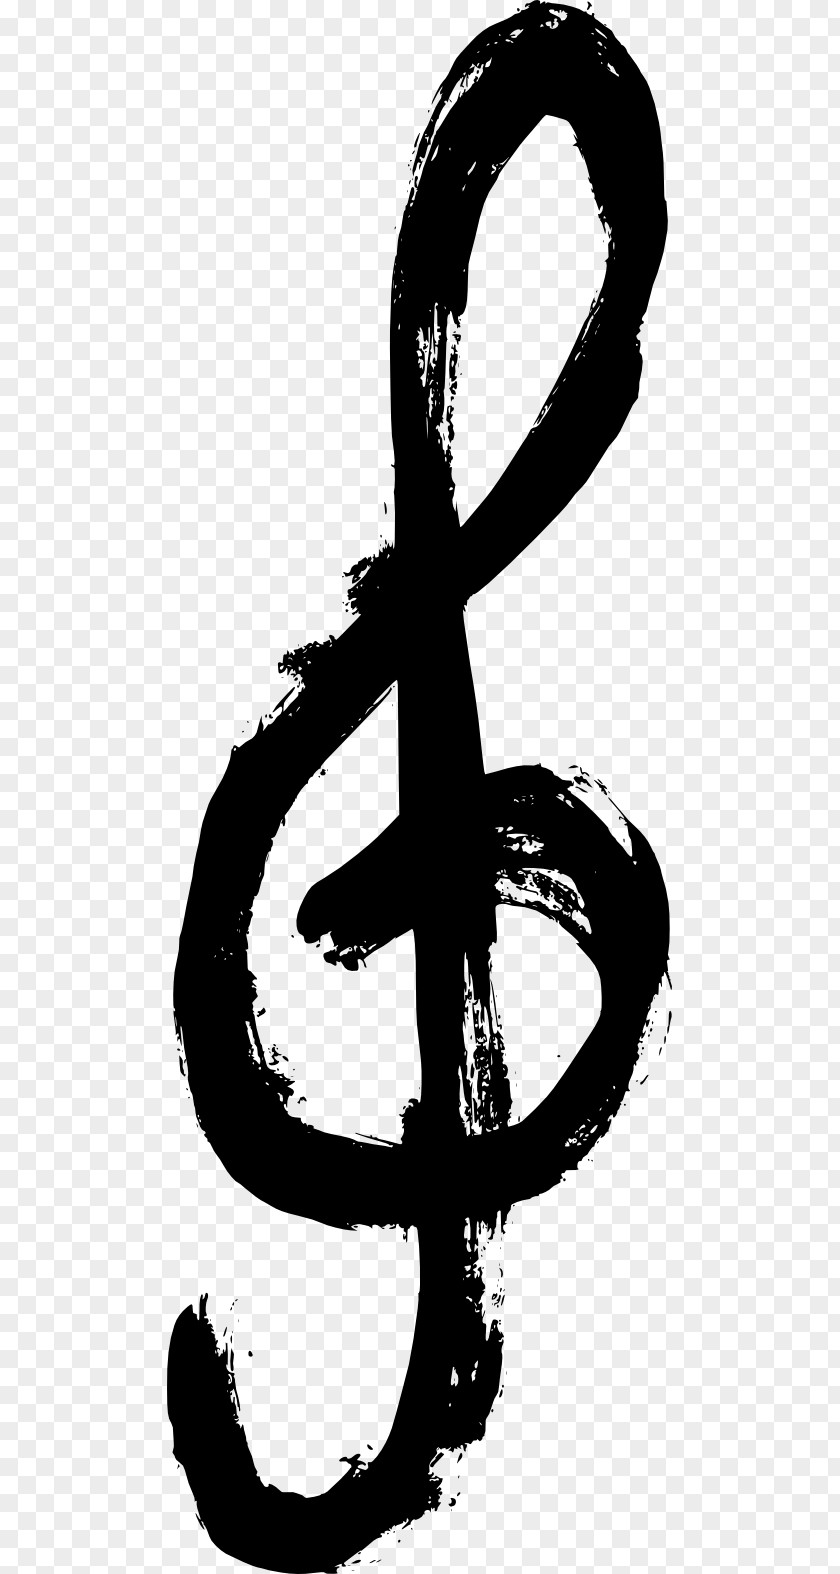 Musical Note Grunge Clip Art PNG